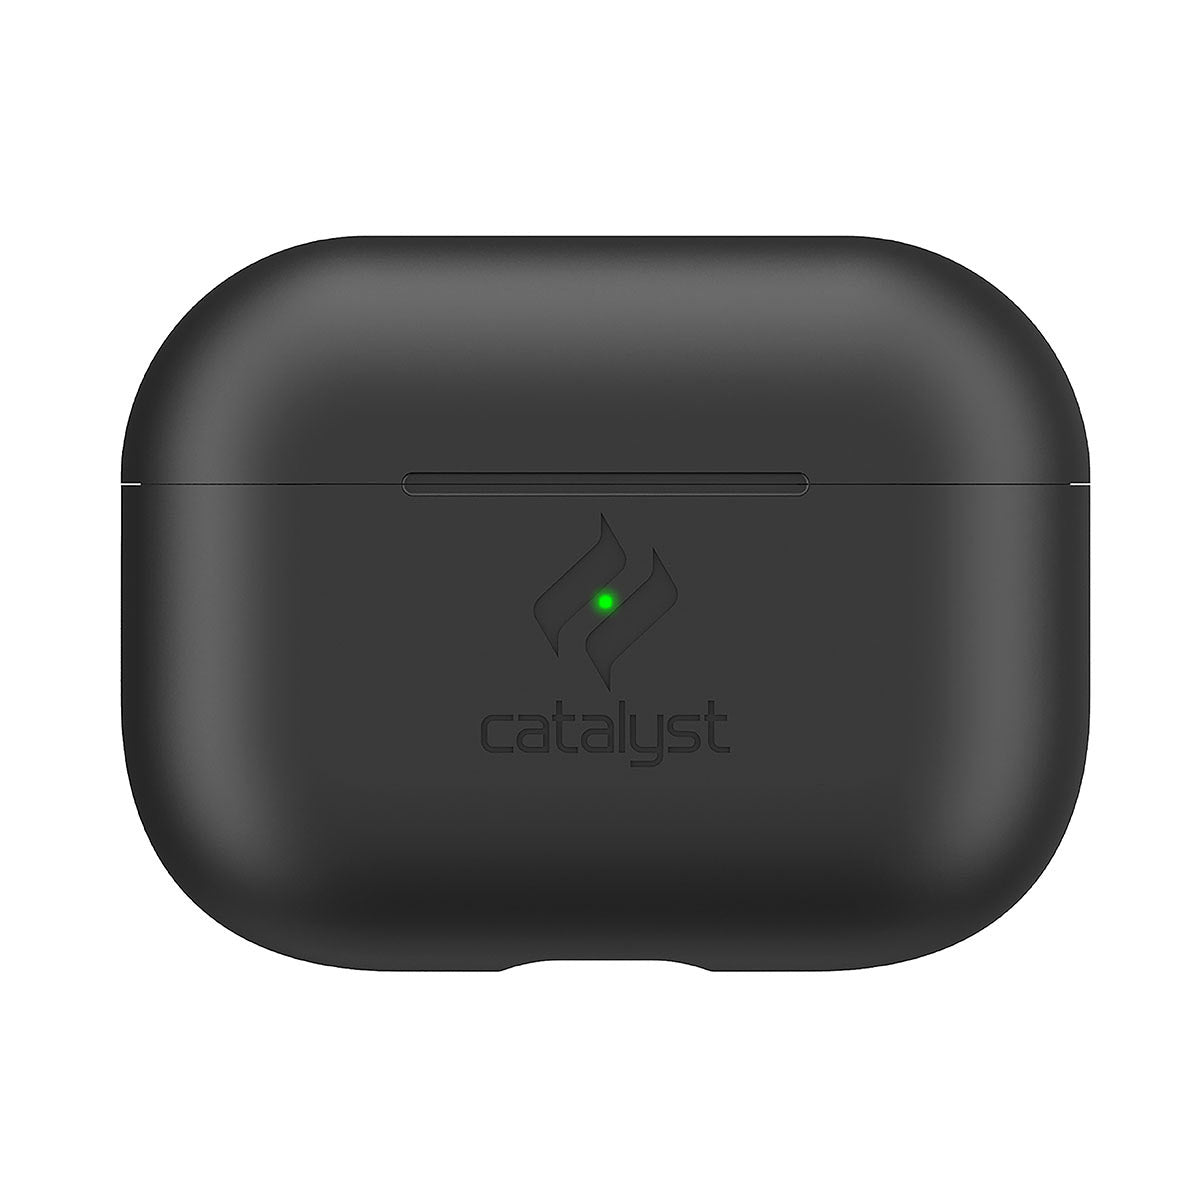 Catalyst airpods pro gen 2/1 slim case showing front view of the case in a stealth black colorway